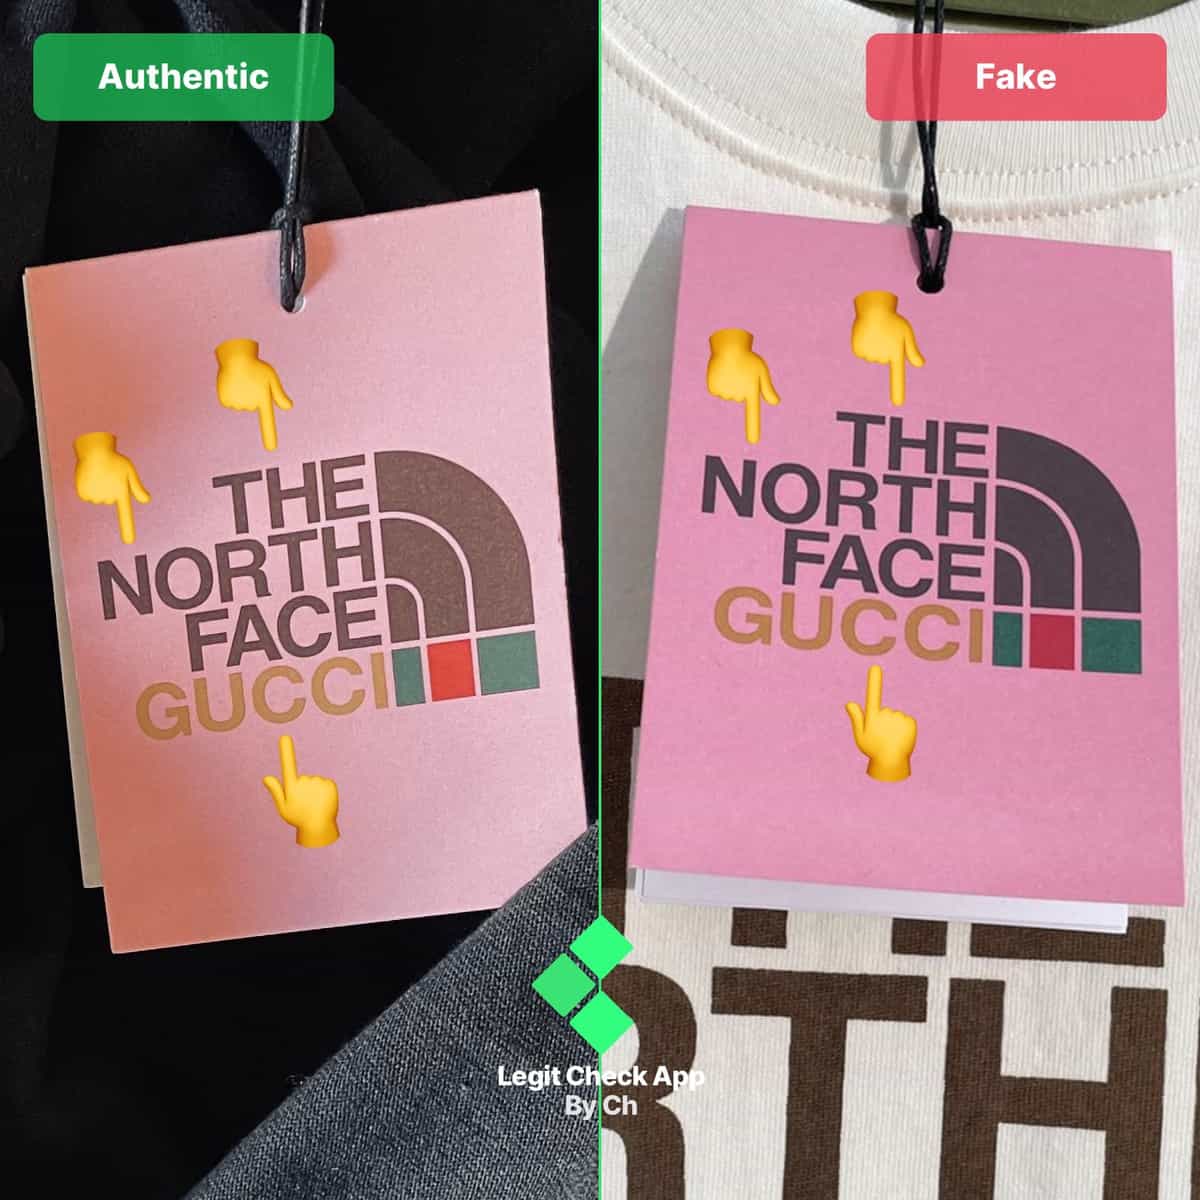 How To Spot Fake Gucci x The North Face Tee - Legit Check By Ch